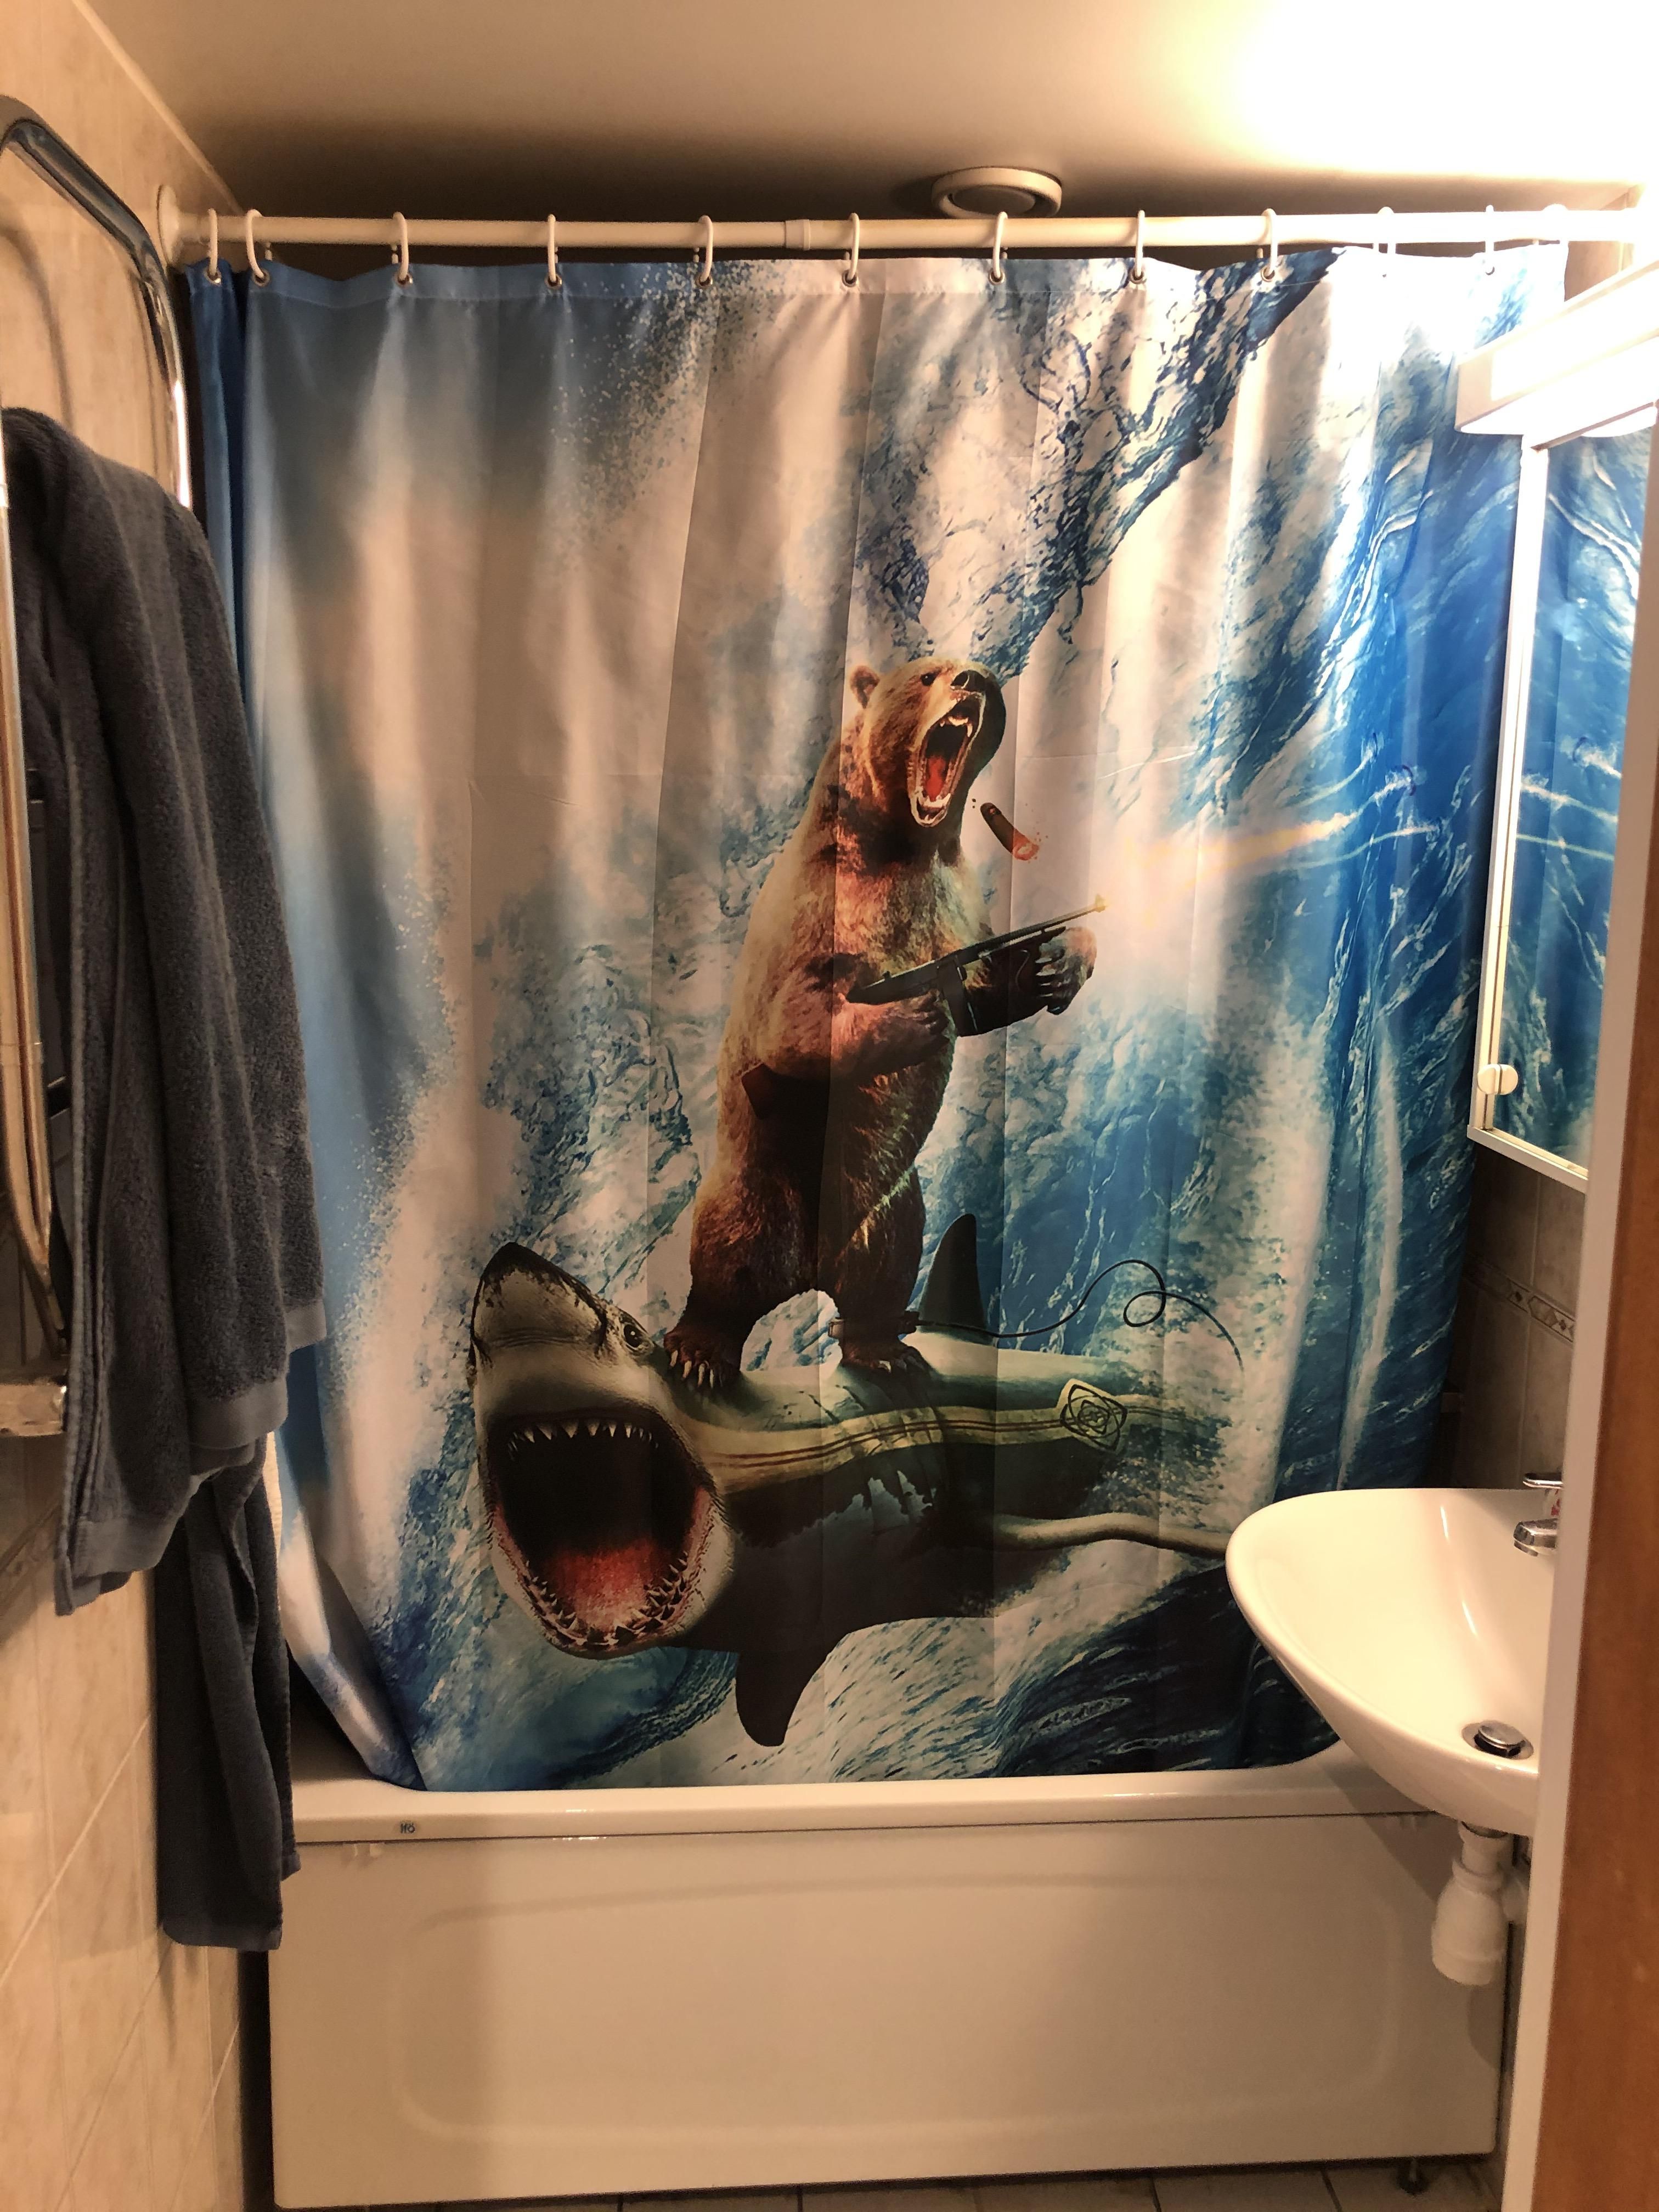 Apparently you guys like shower curtains, so here’s mine. You’re welcome.